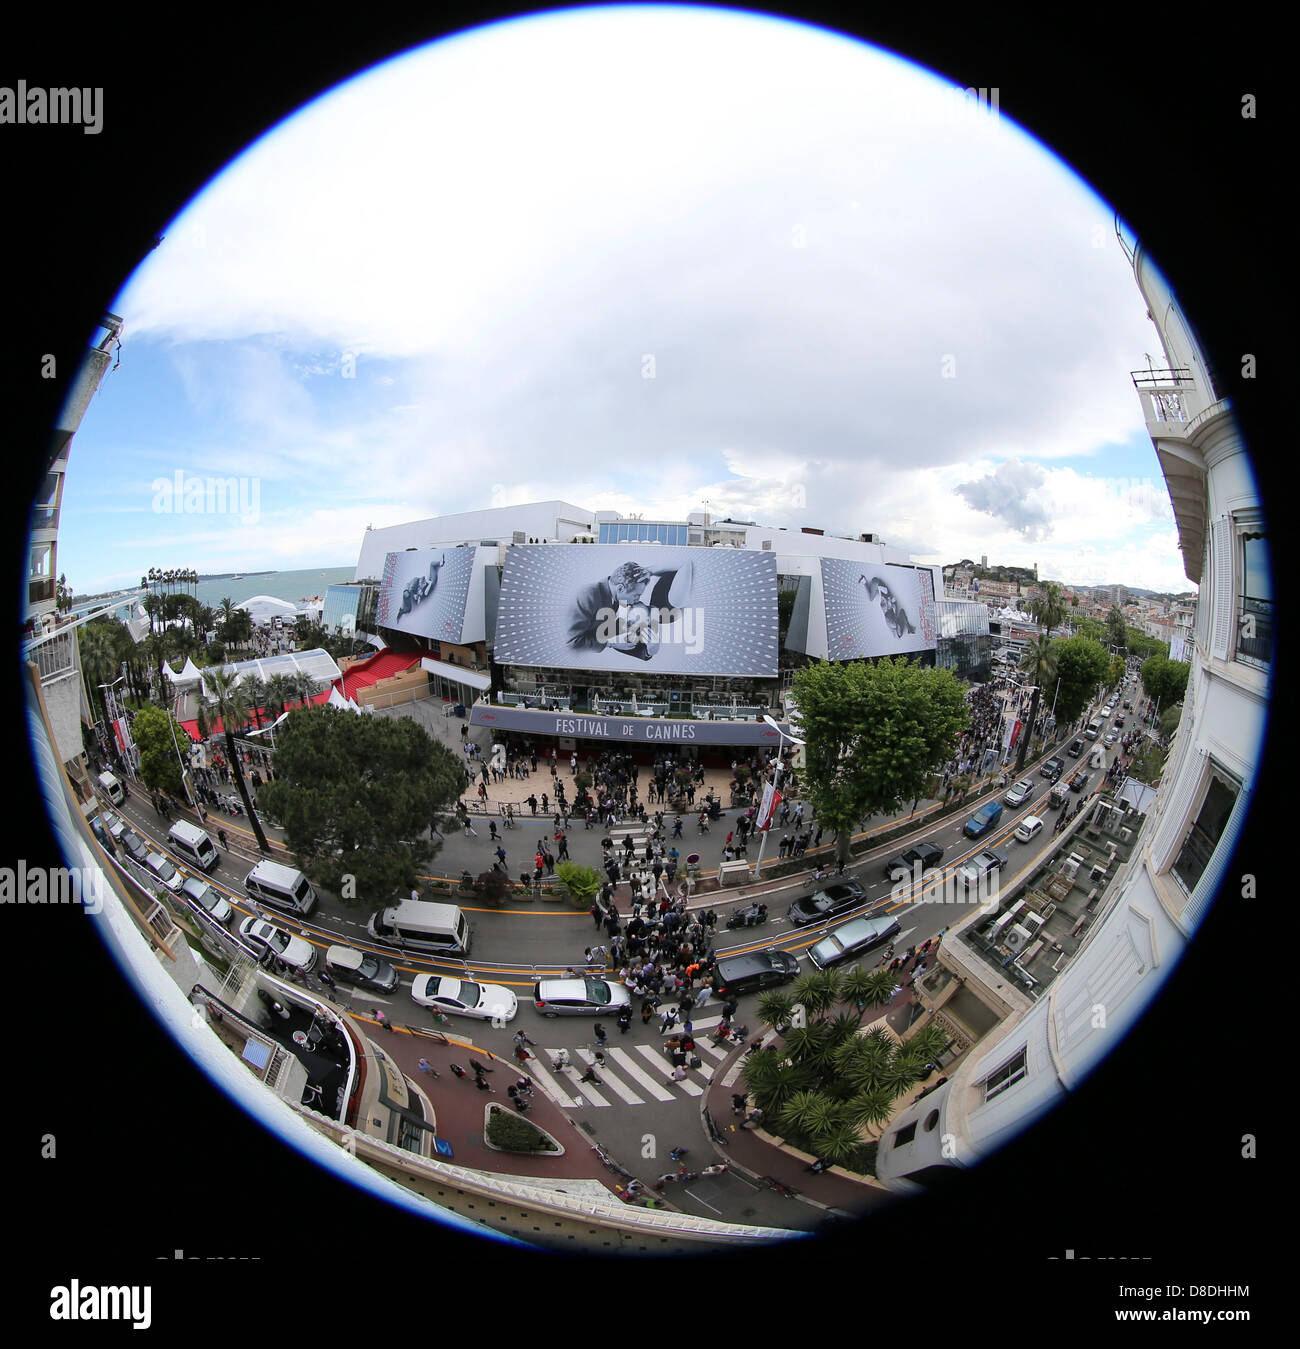 Cannes Film Festival 2013: Wide Angle and Fisheye Shots Stock Photo